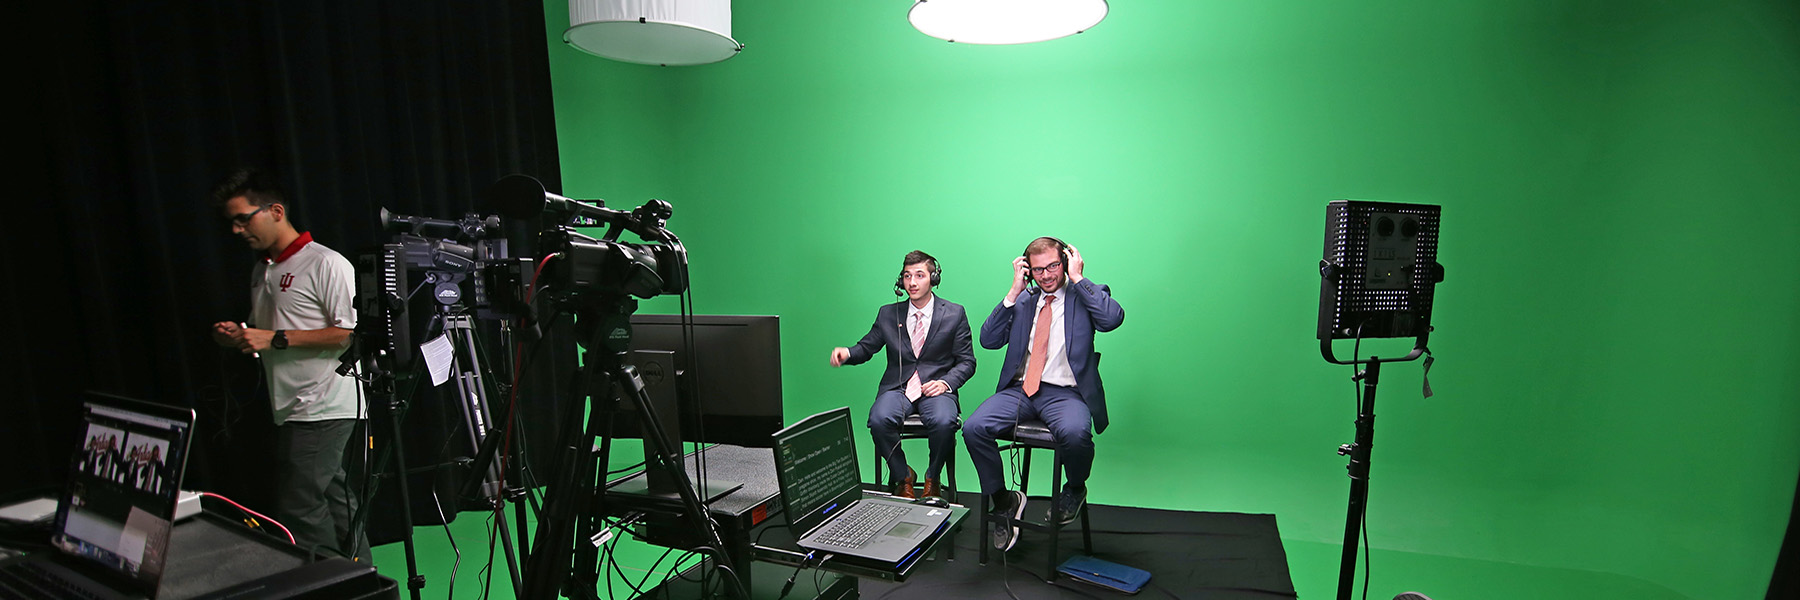 Students preparing to film in front of a green screen.